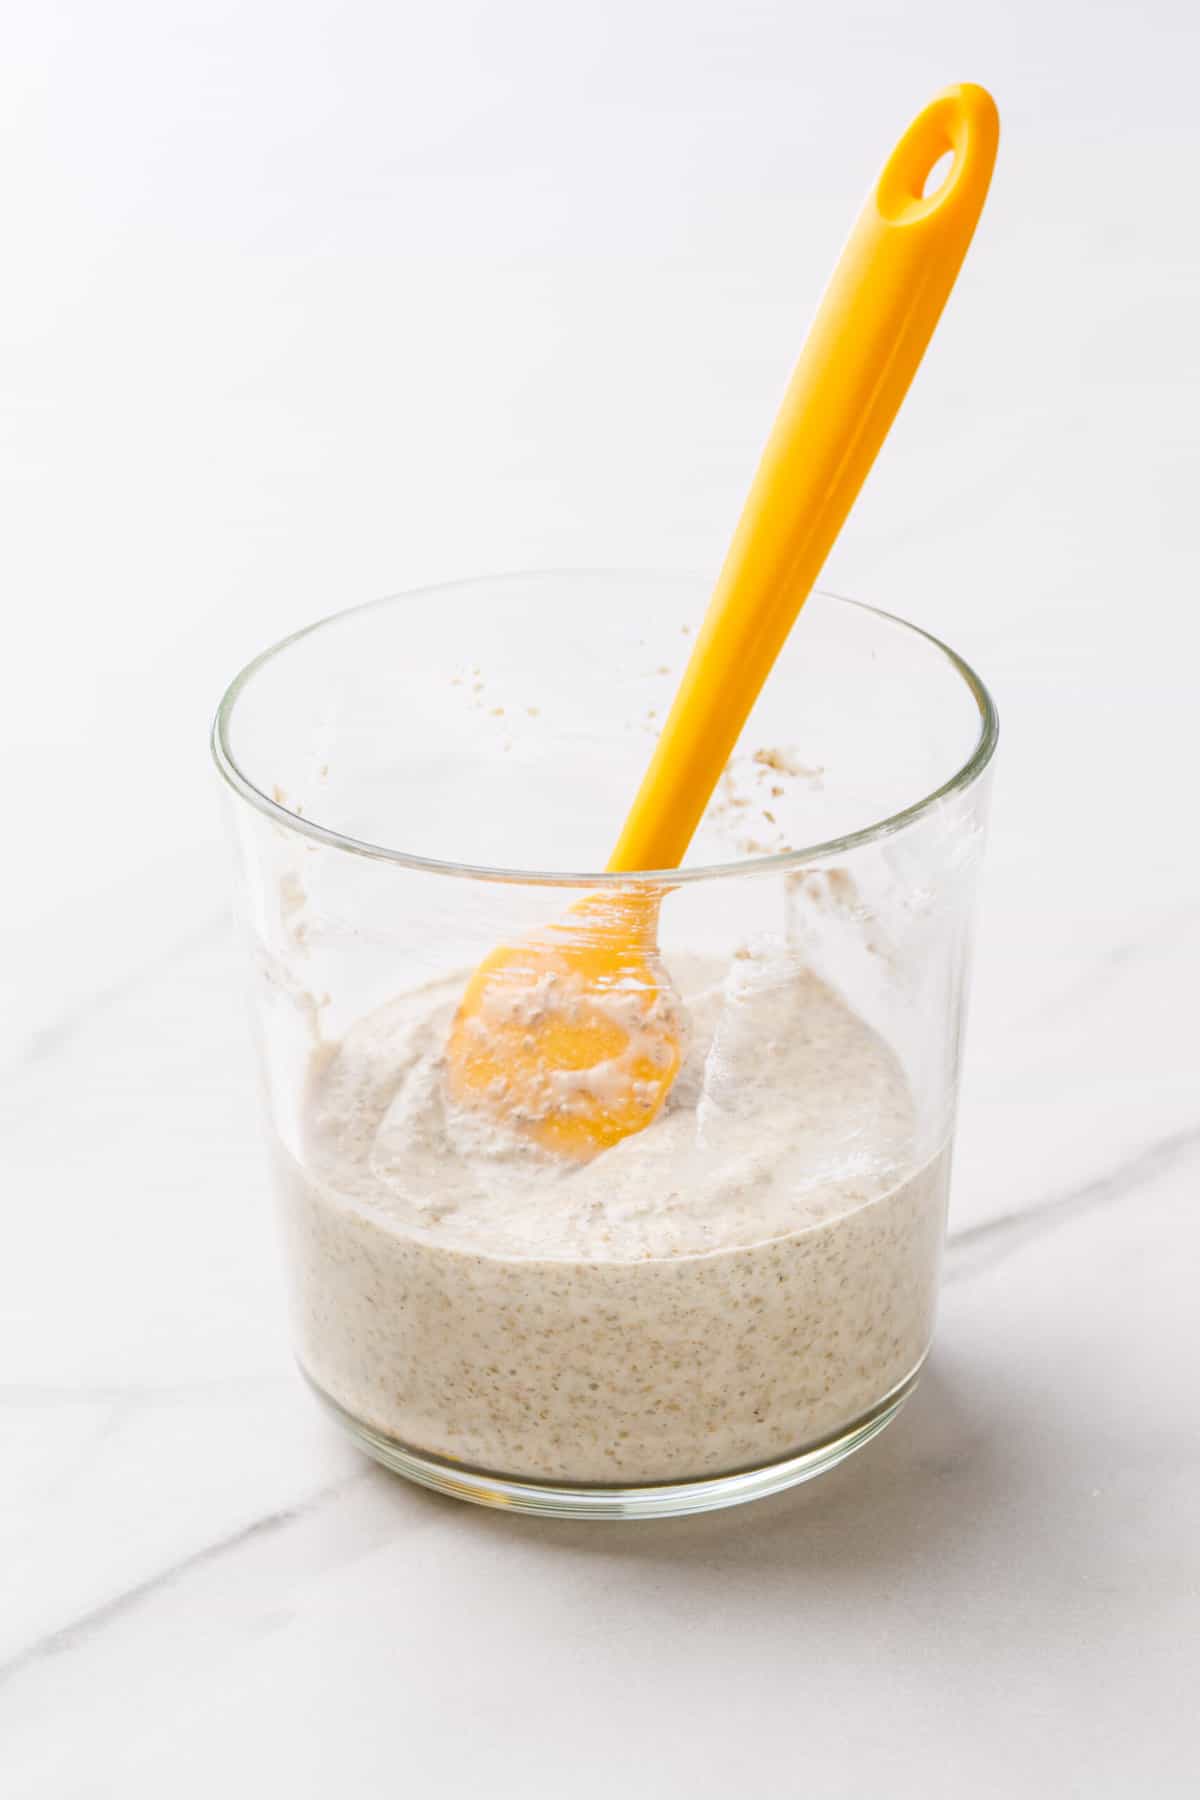 Sourdough Starter in a clear glass jar with a yellow silicone spatula. 